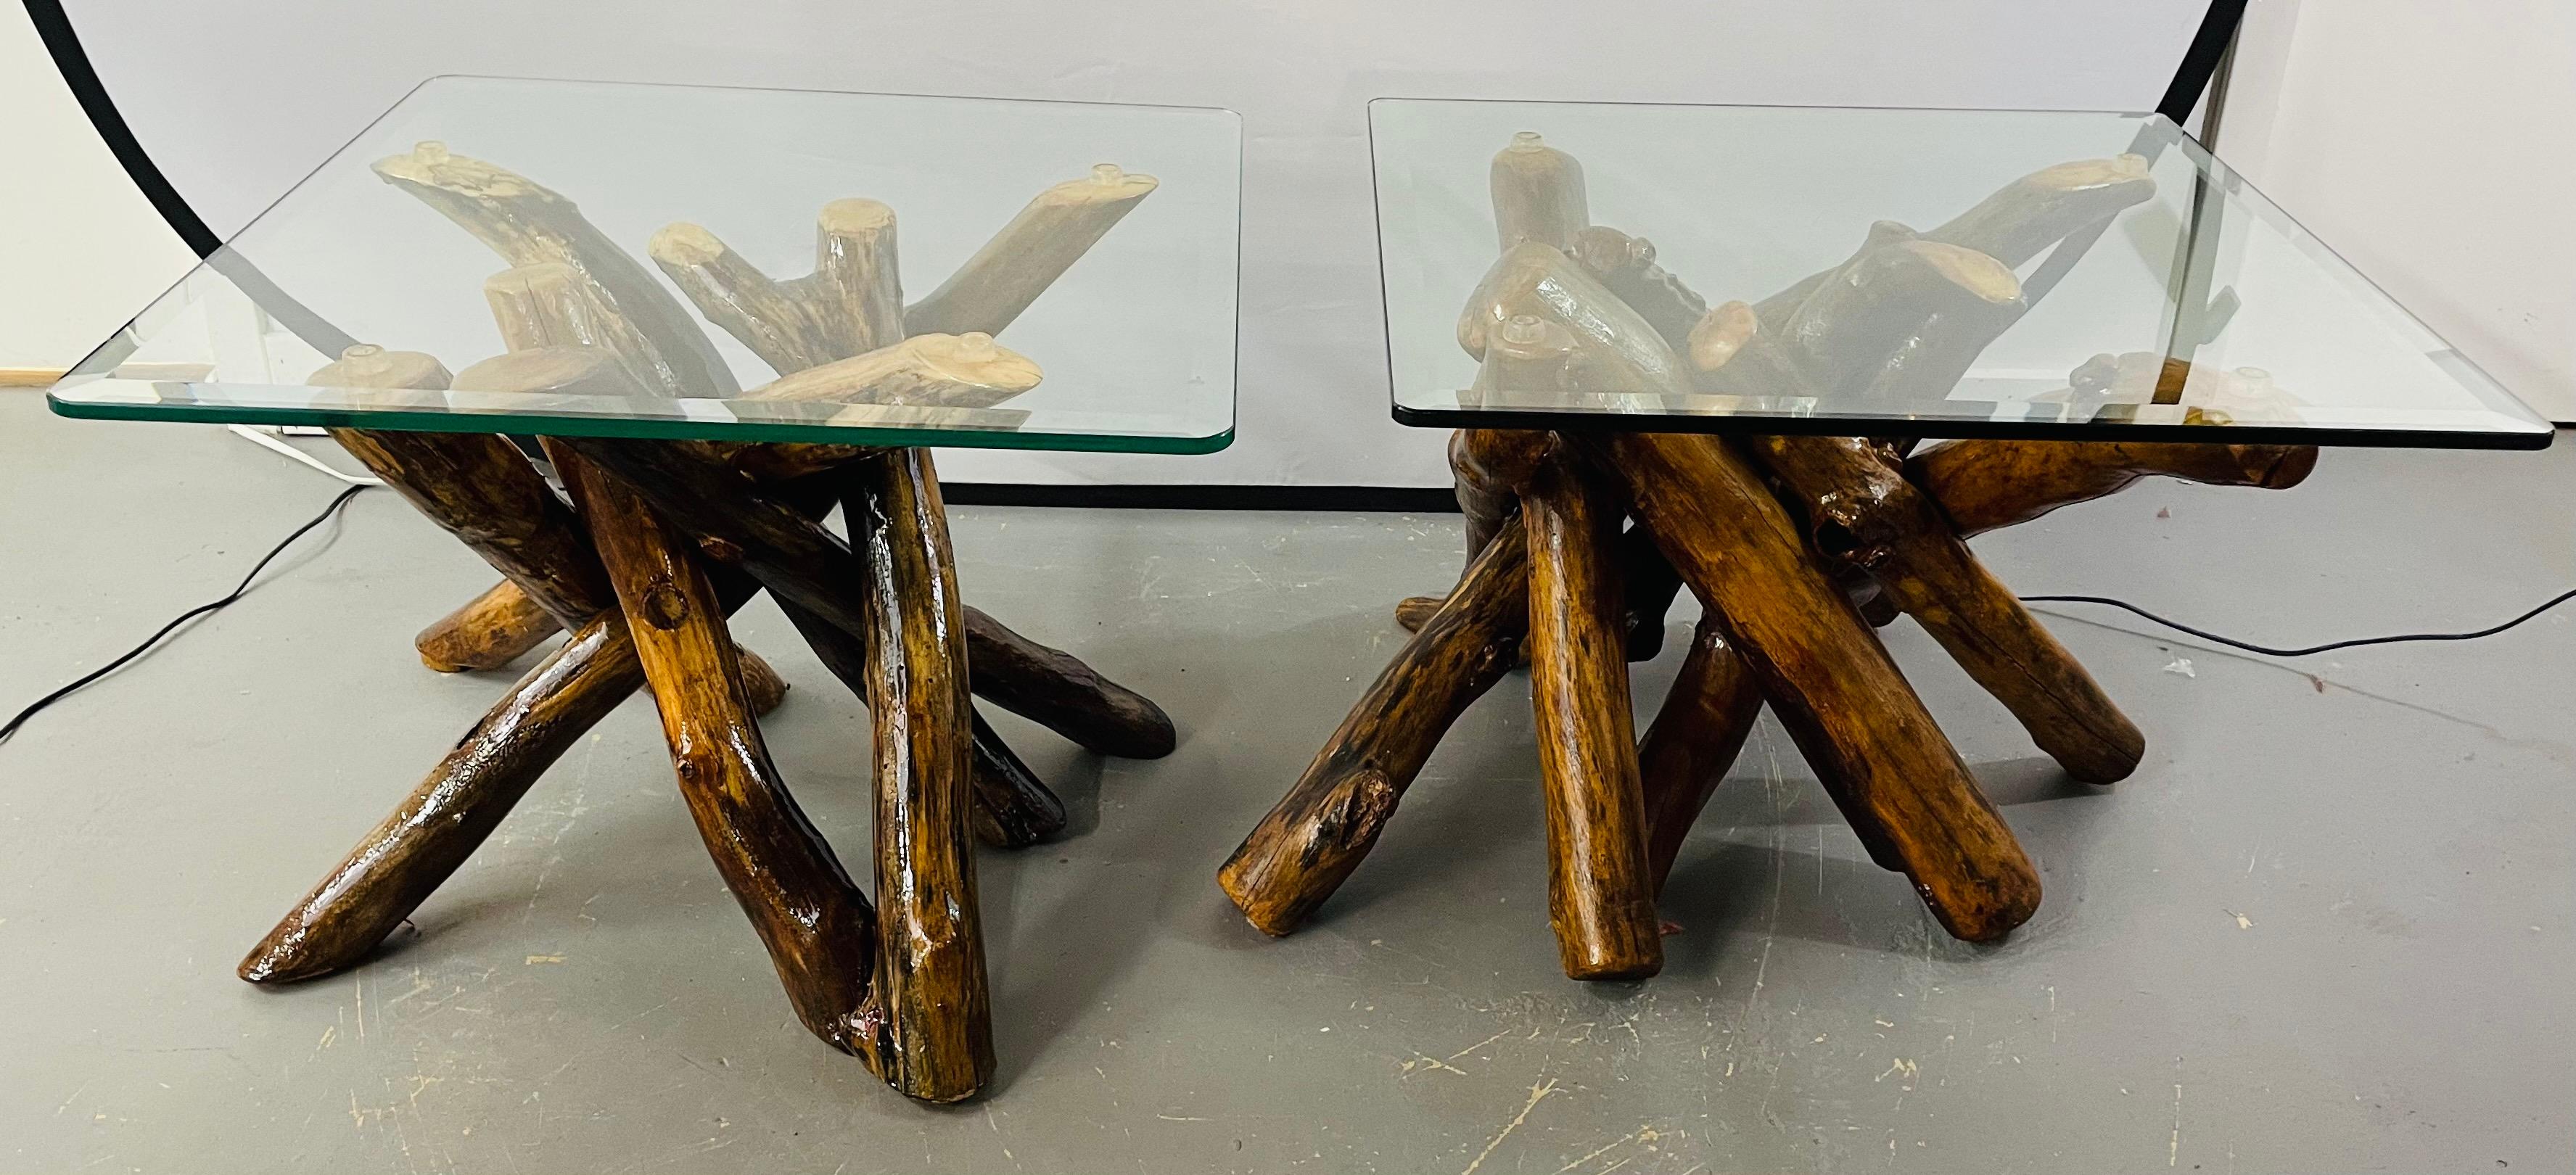 Side tables of reclaimed wood and bevelled glass top, a pair

A pair of rustic natural wood base side or end tables in an organic design fashion. This amazing pair of end or side tables feature veneered maple wood twist logs put together in an